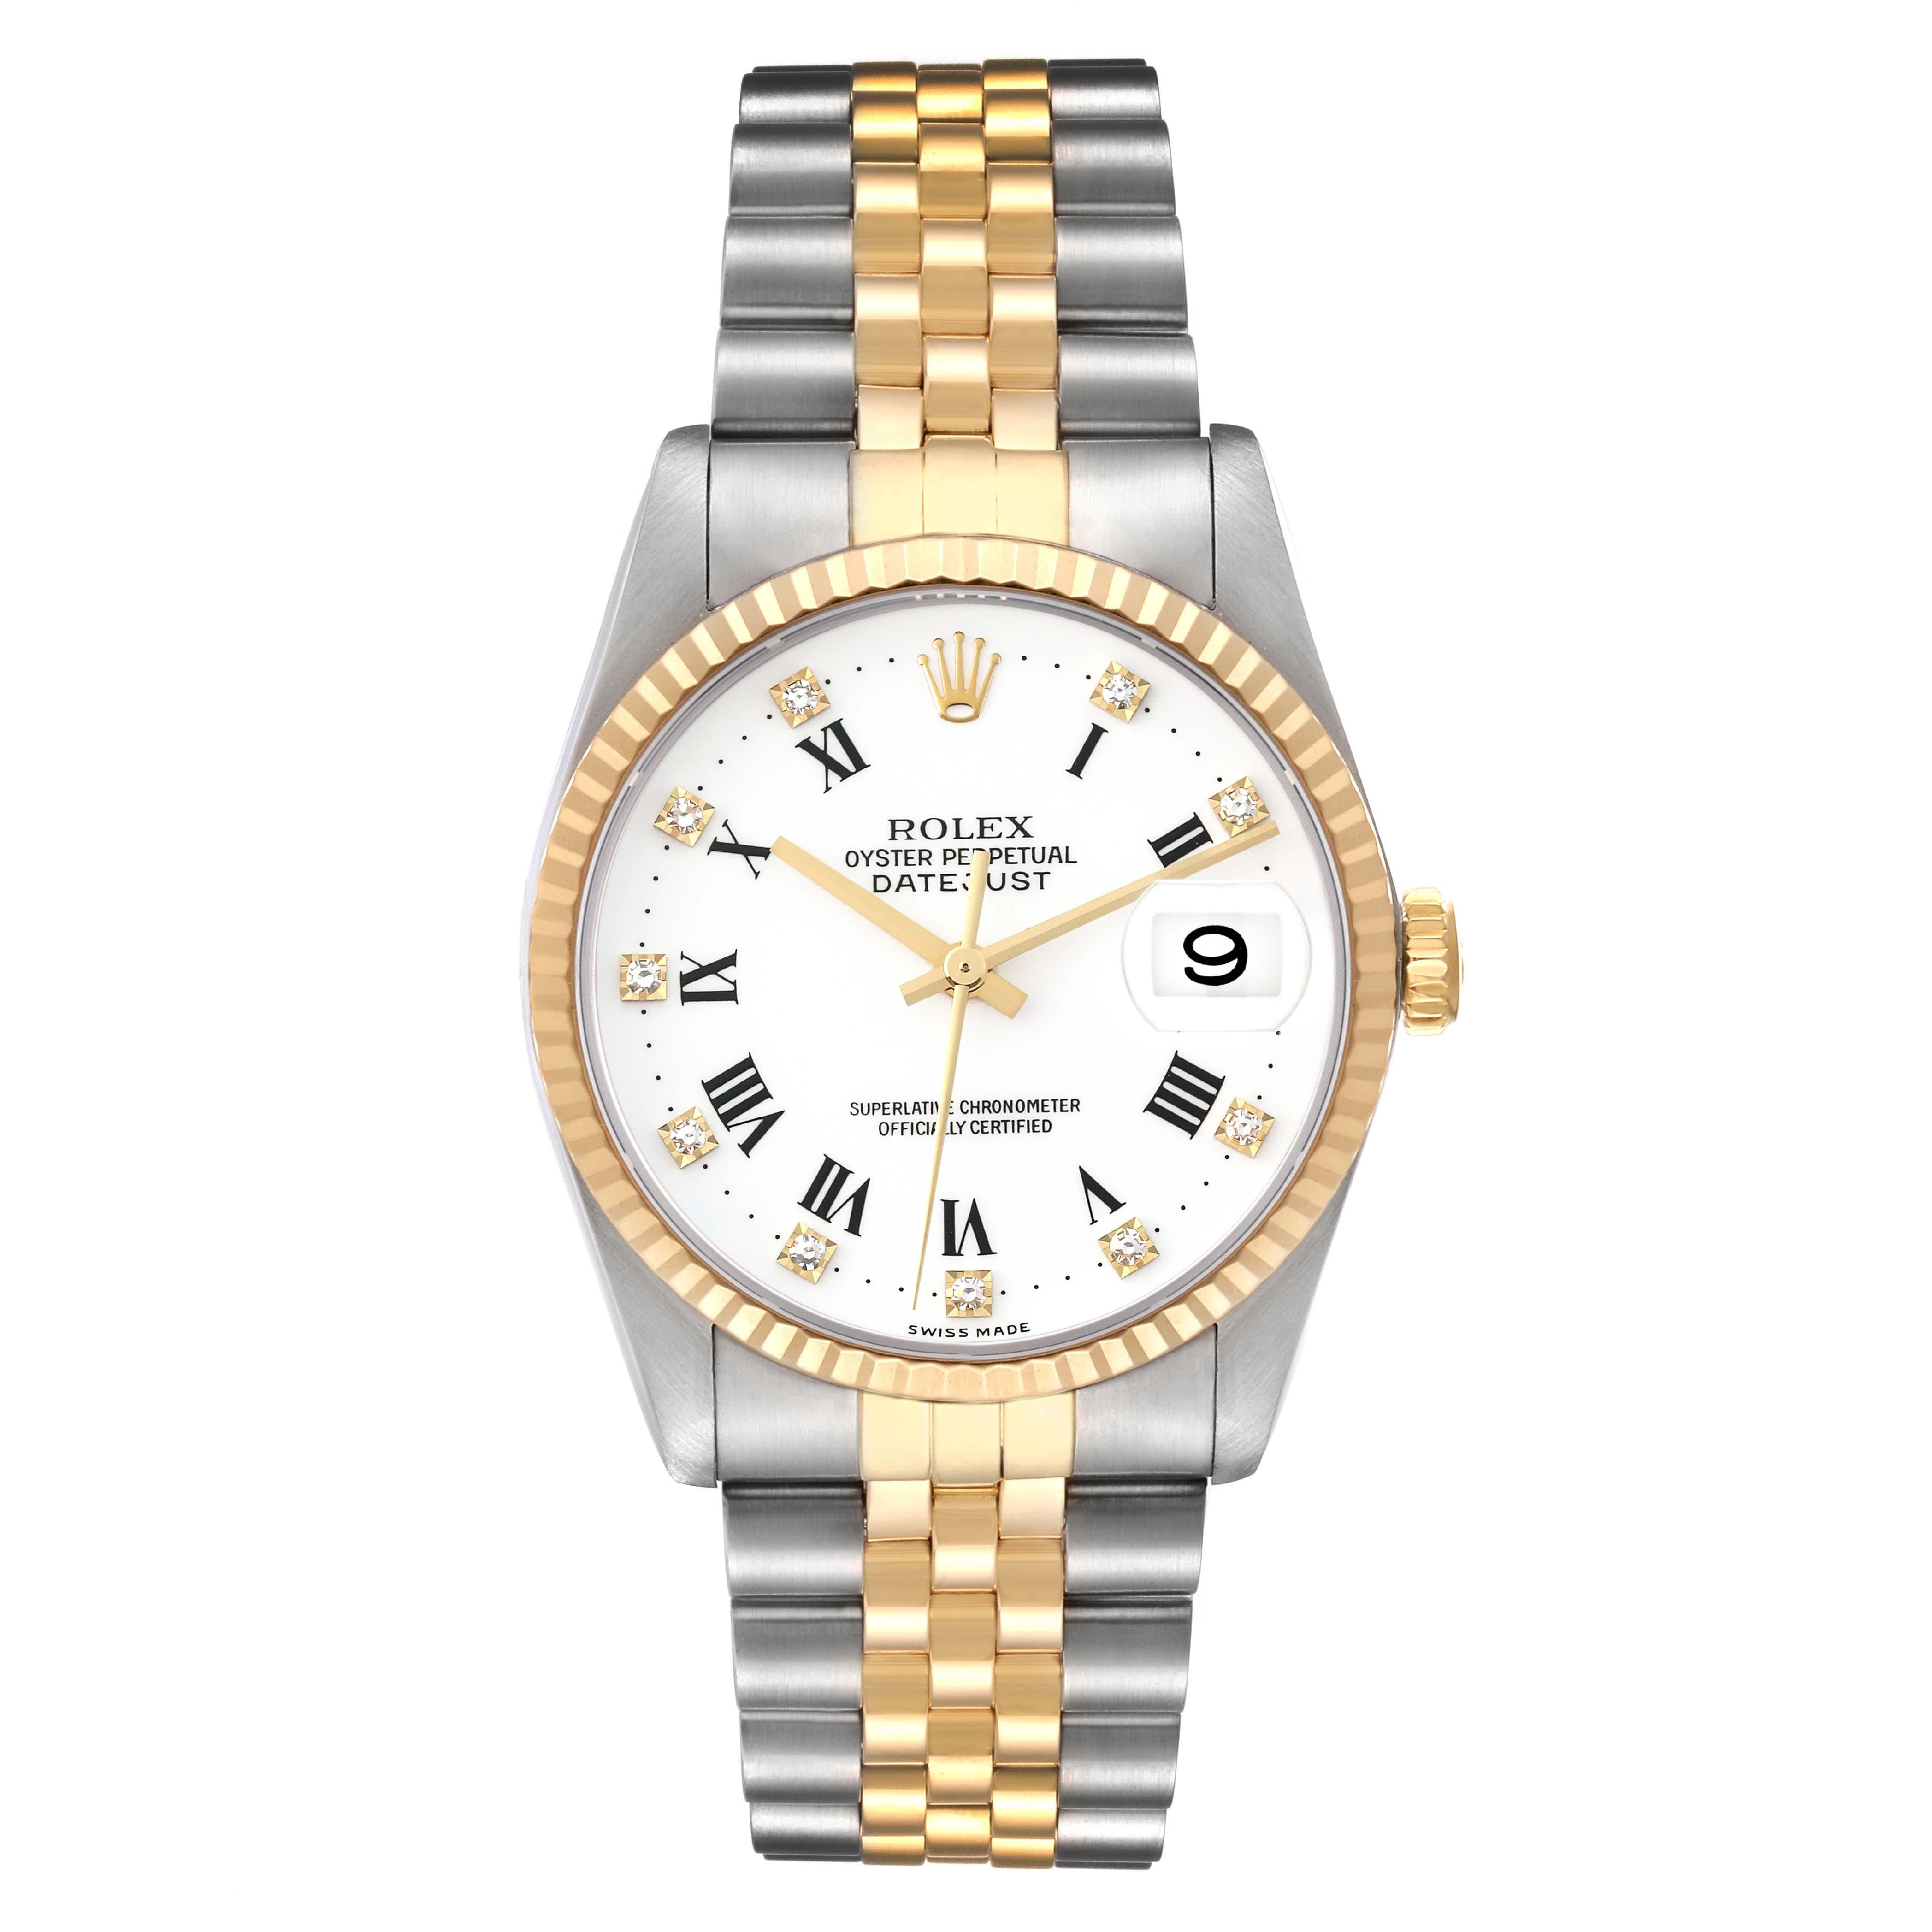 Rolex Datejust Steel Yellow Gold White Diamond Dial Mens Watch 16233. Officially certified chronometer automatic self-winding movement. Stainless steel case 36 mm in diameter.  Rolex logo on an 18K yellow gold crown. 18k yellow gold fluted bezel.